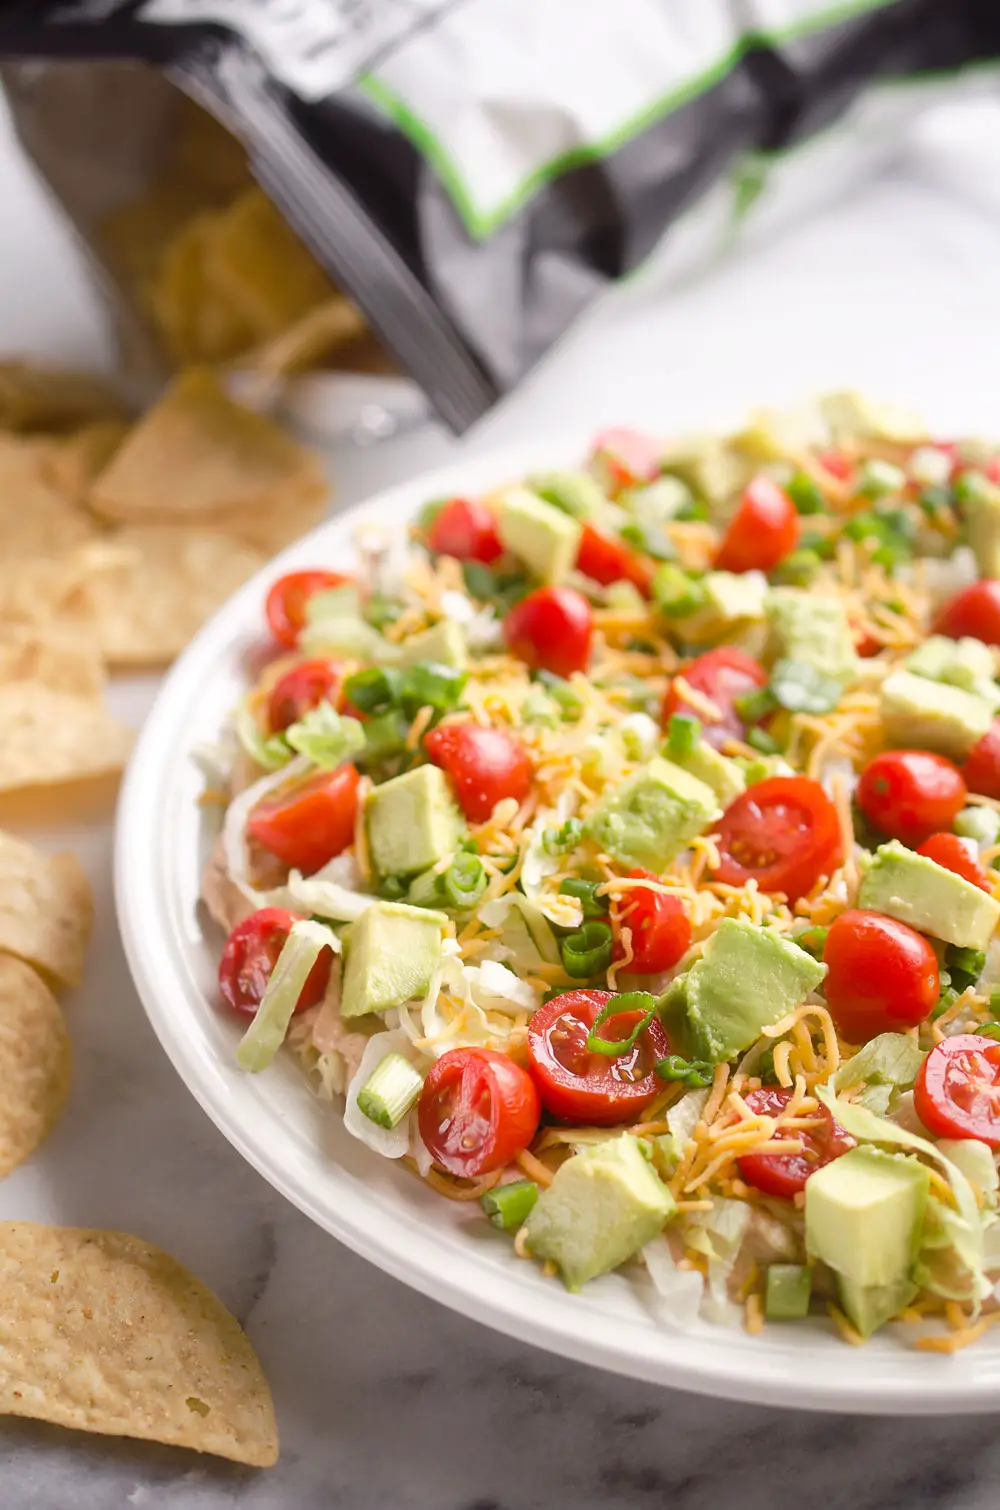 20+ Best Dinner Party Food Ideas - Easy Dinner Party Recipes, Skinny Taco Dip